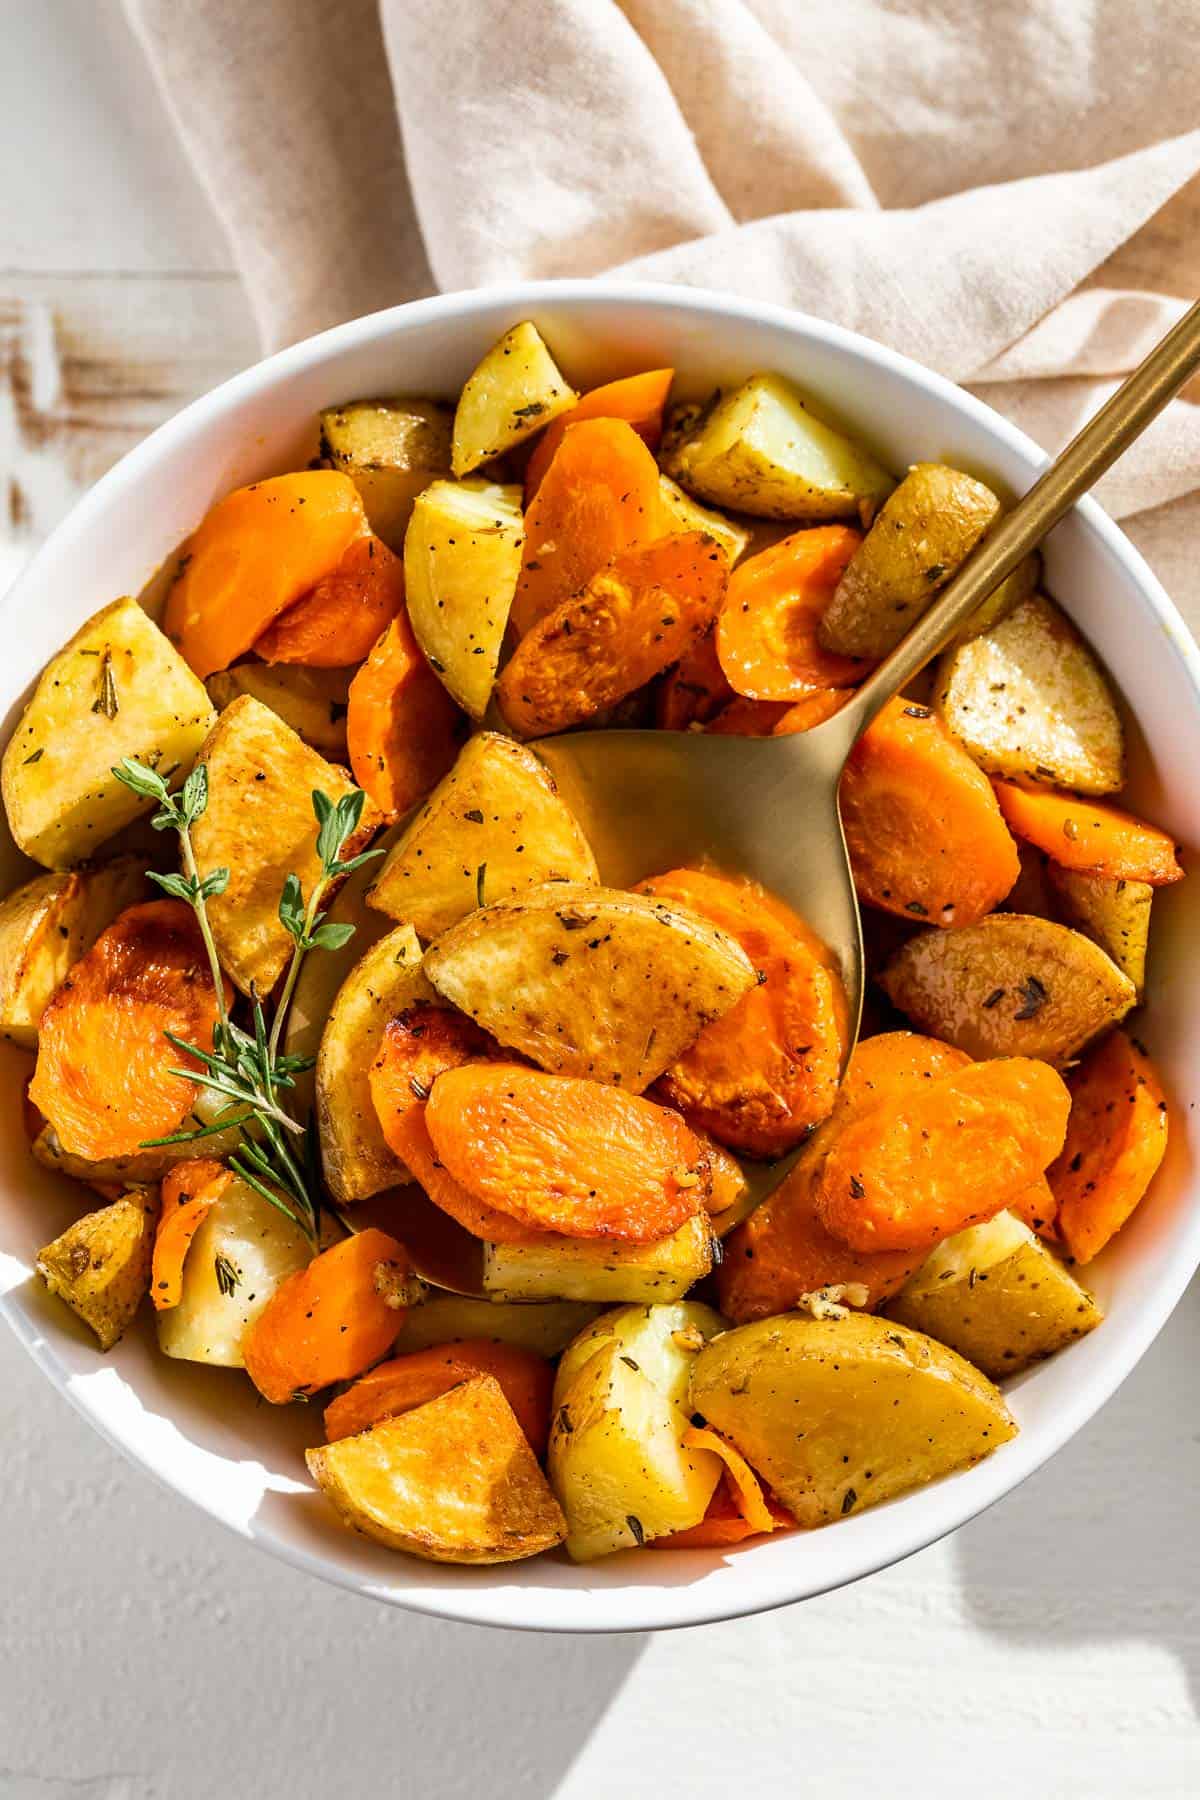 Cubed roasted carrots and potatoes in a white bowl with a gold spoon.